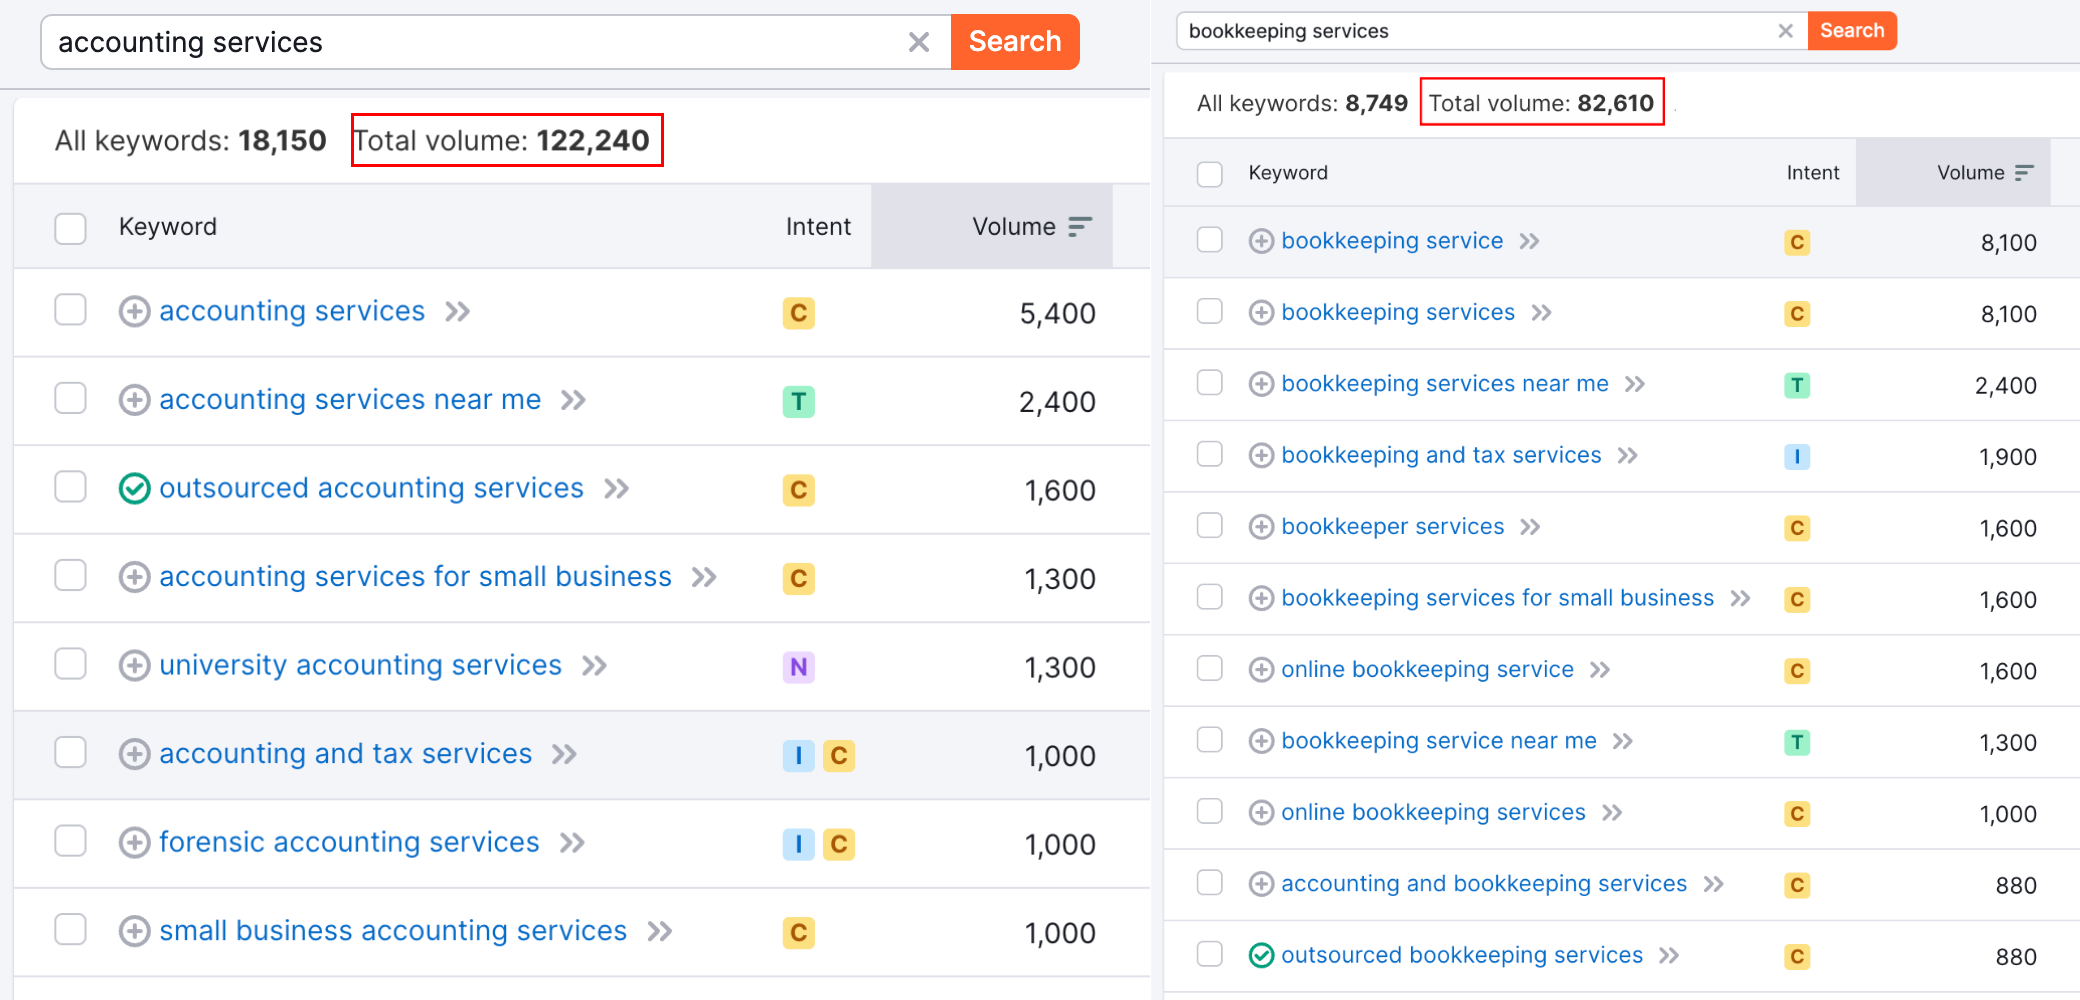 snapshot showing the keyword search volume for accounting services and bookkeeping services